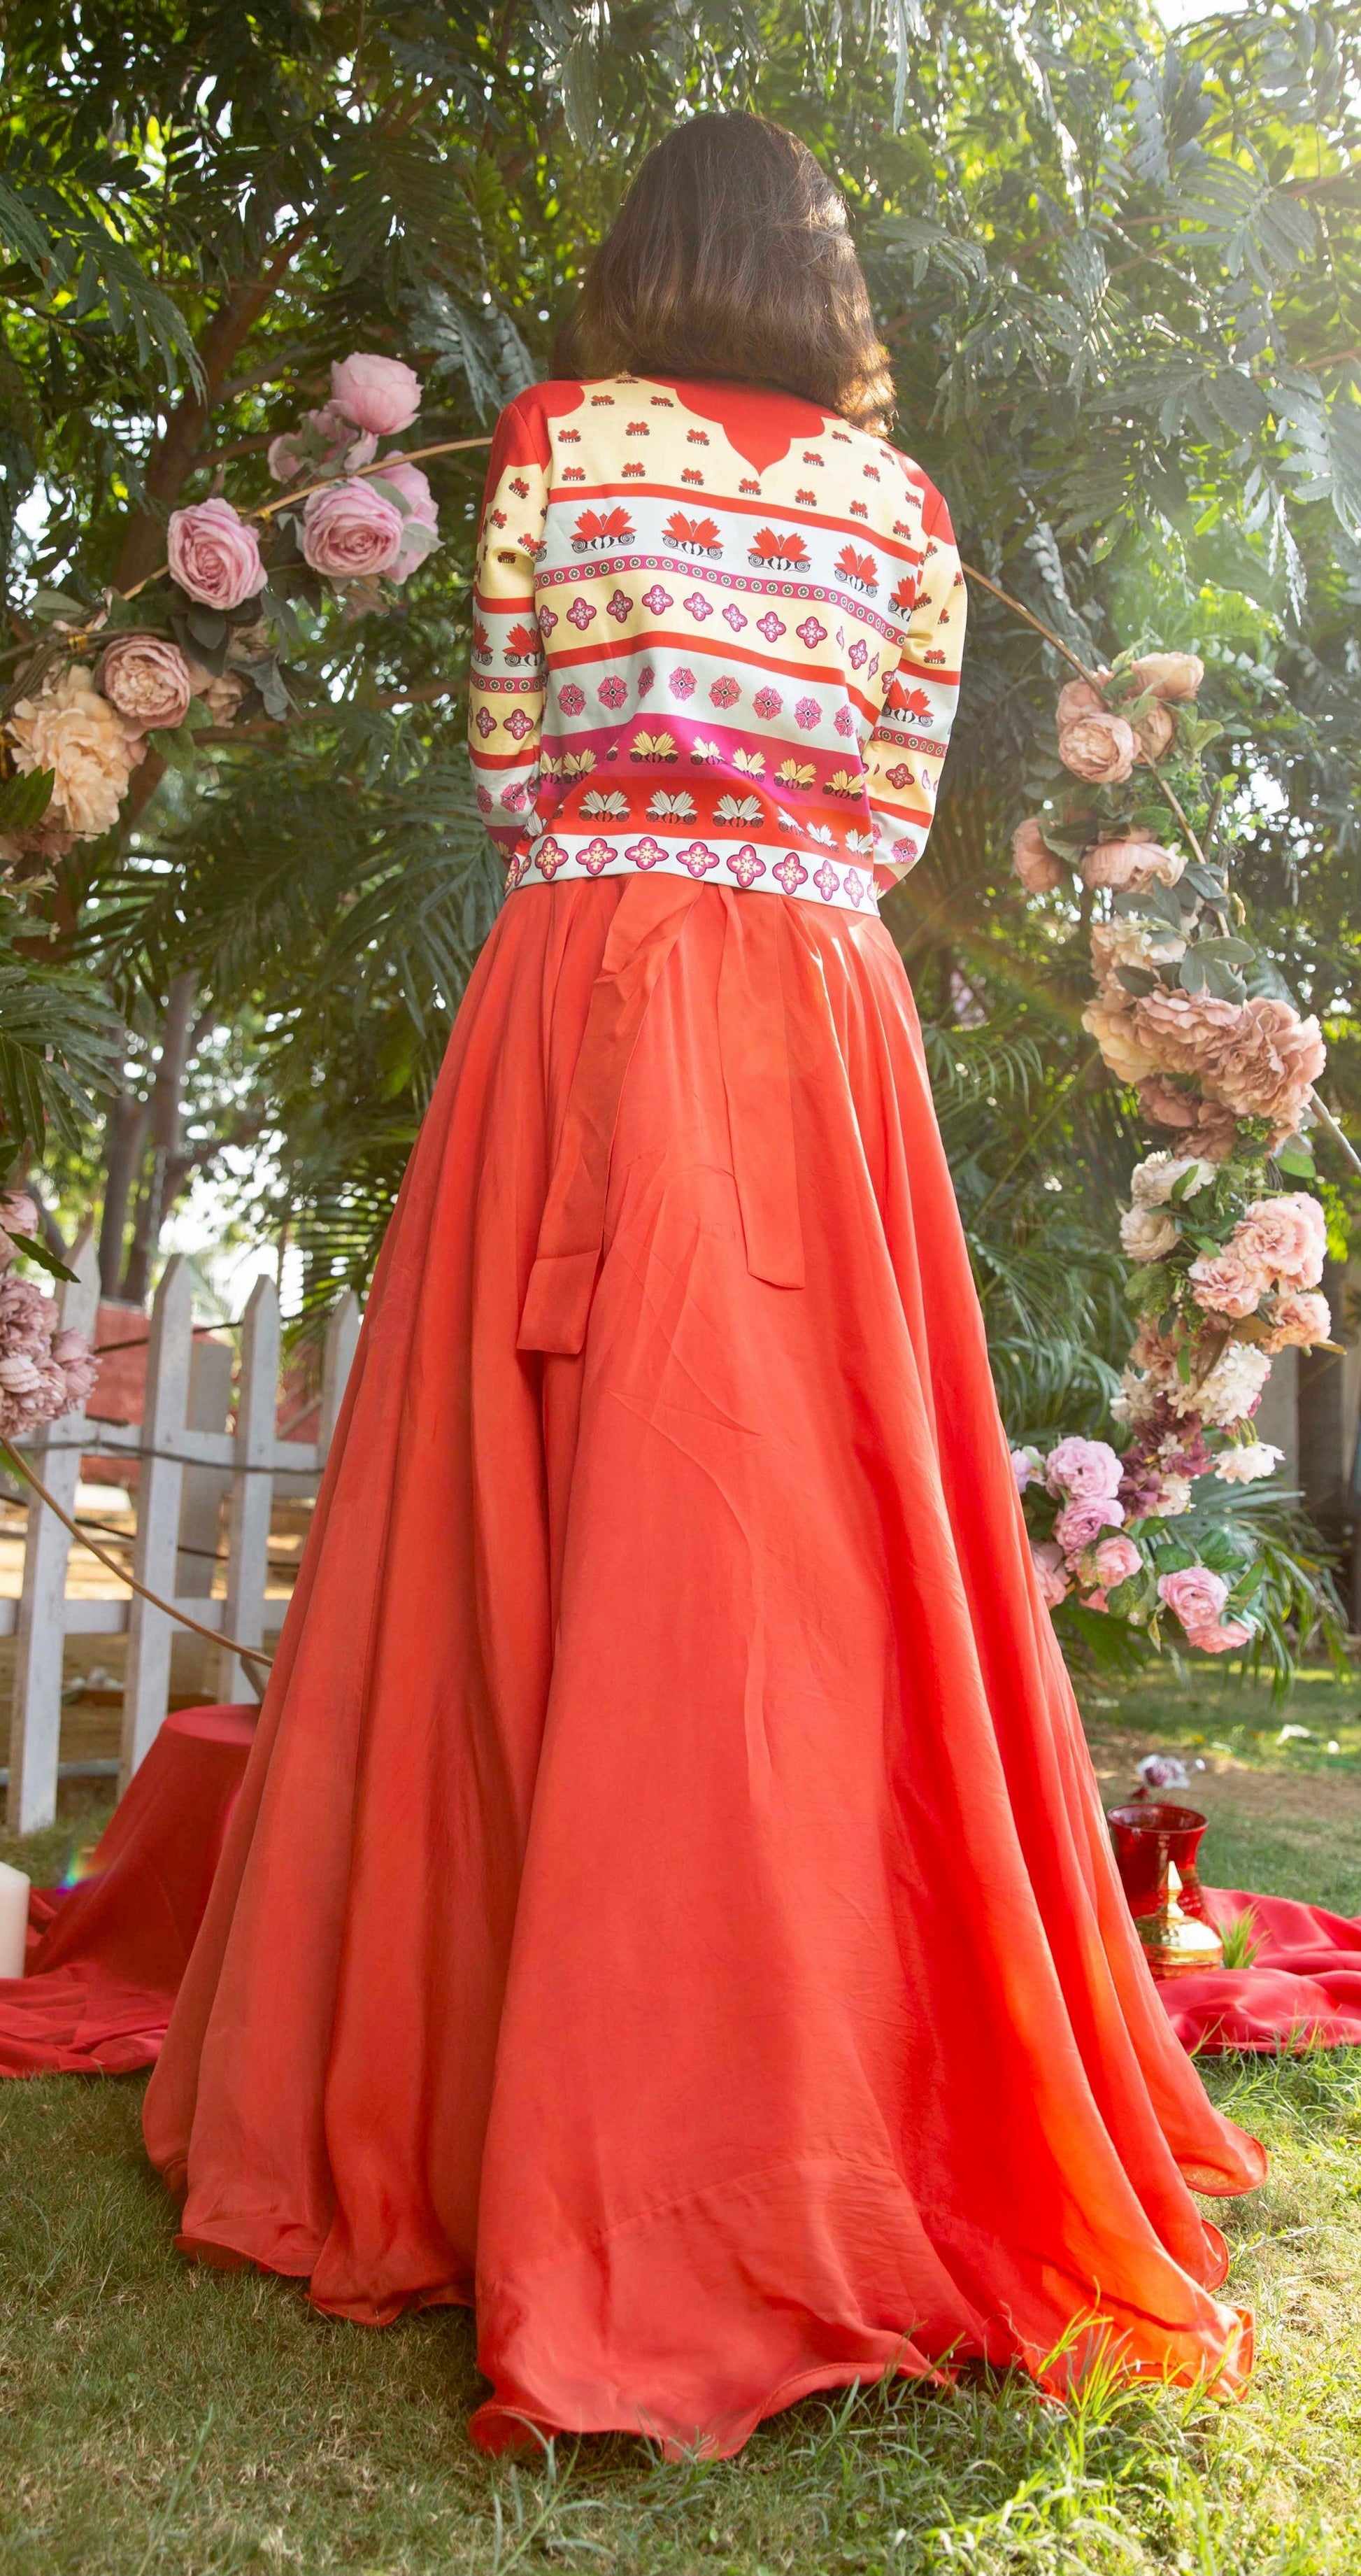 The 'summer breeze' red lehenga set with a printed jacket - Nishi Madaan Label